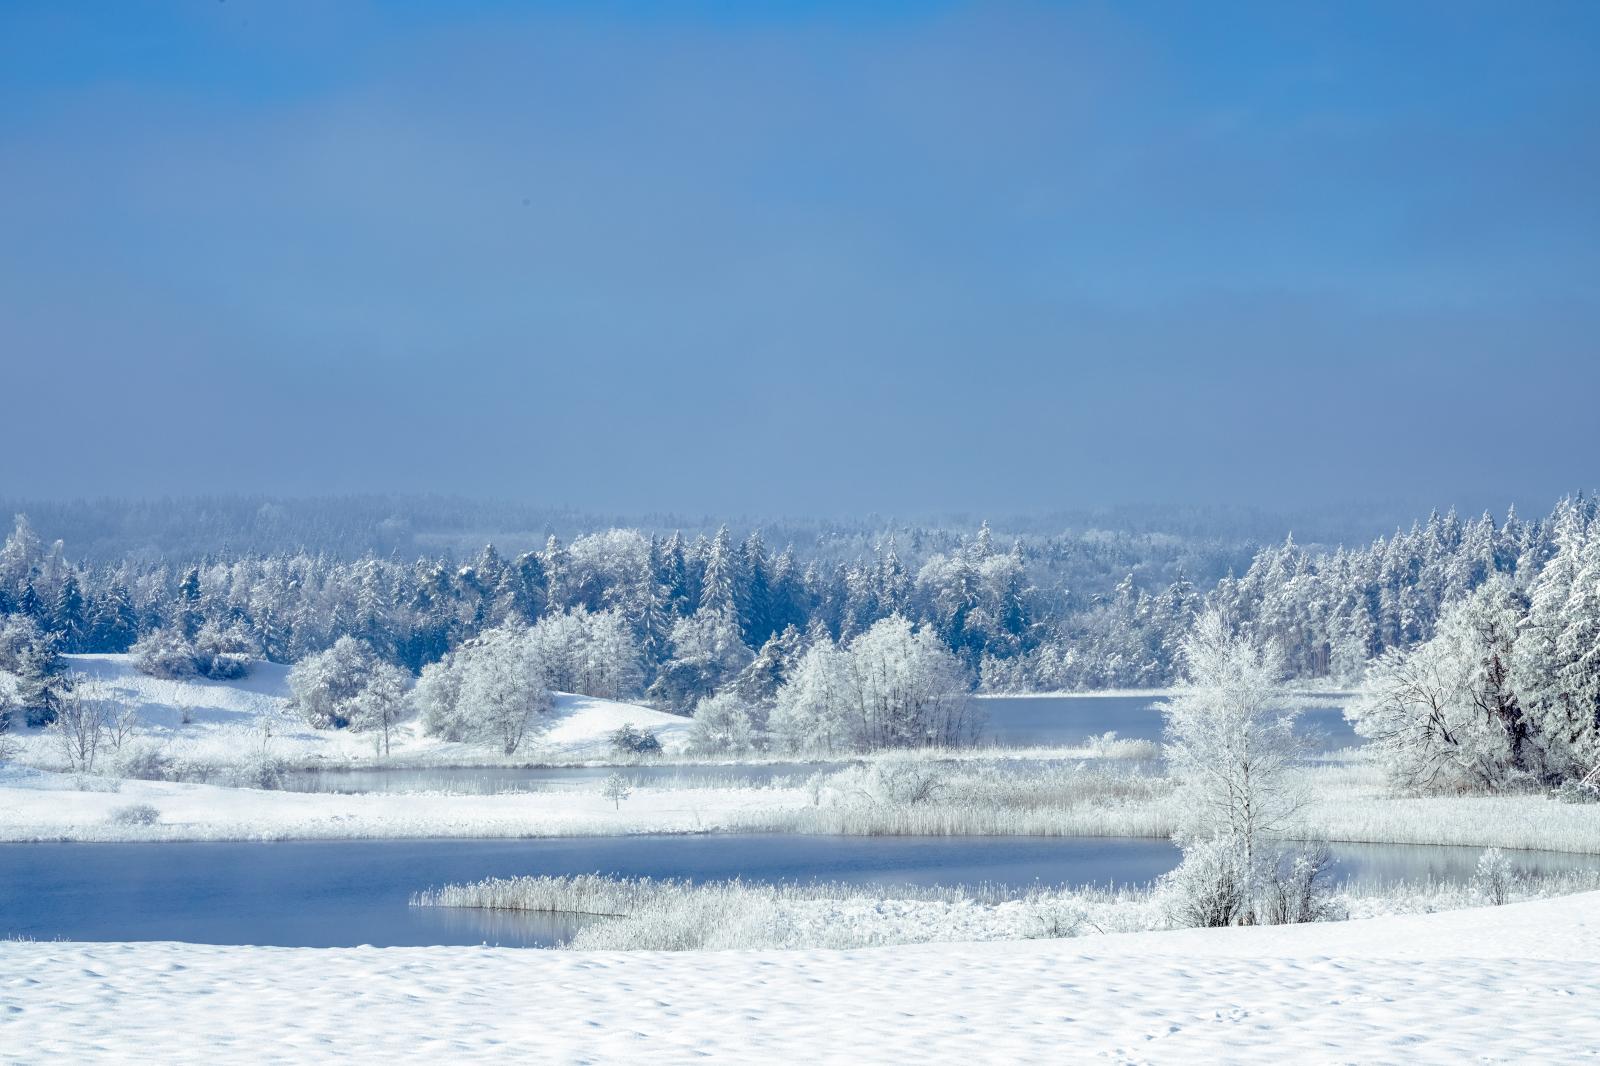 Image from Seasons, Nature and Landscape -  Iffeldorf, Germany  # 4115 1/2023 Icy Tranquility:...